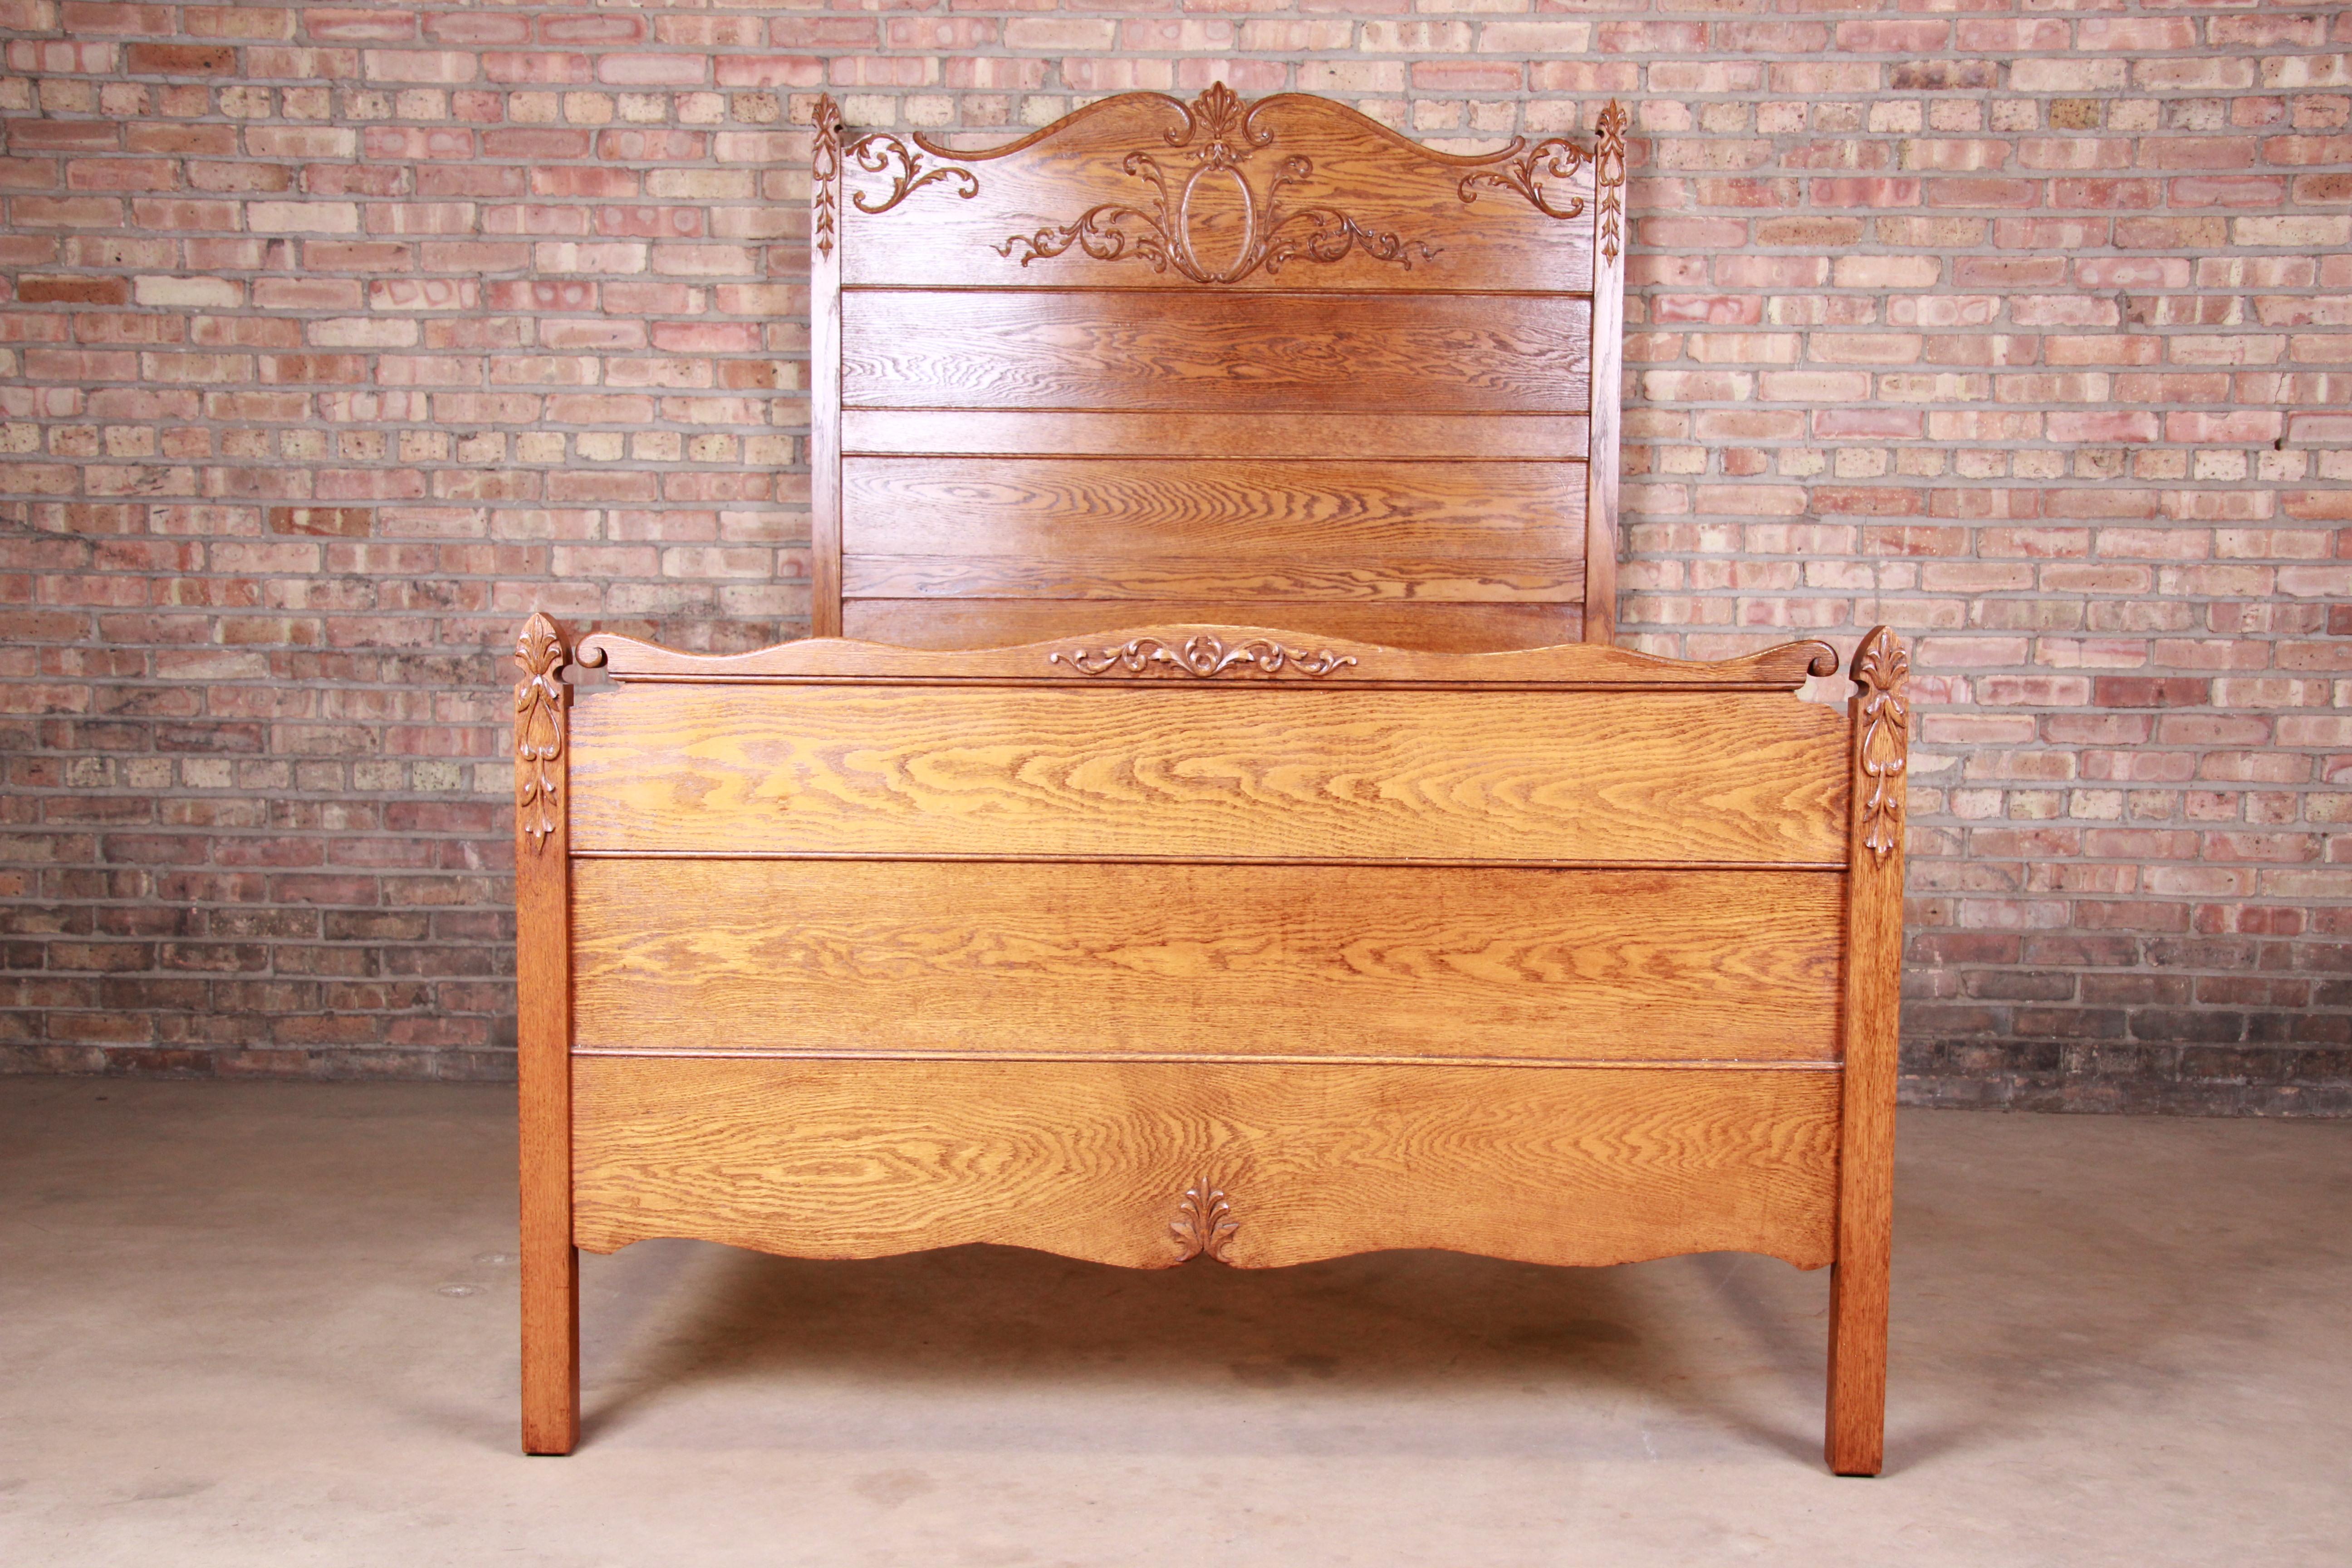 A gorgeous antique carved oak full size bed frame

USA, circa 1900

Measures: 56.63